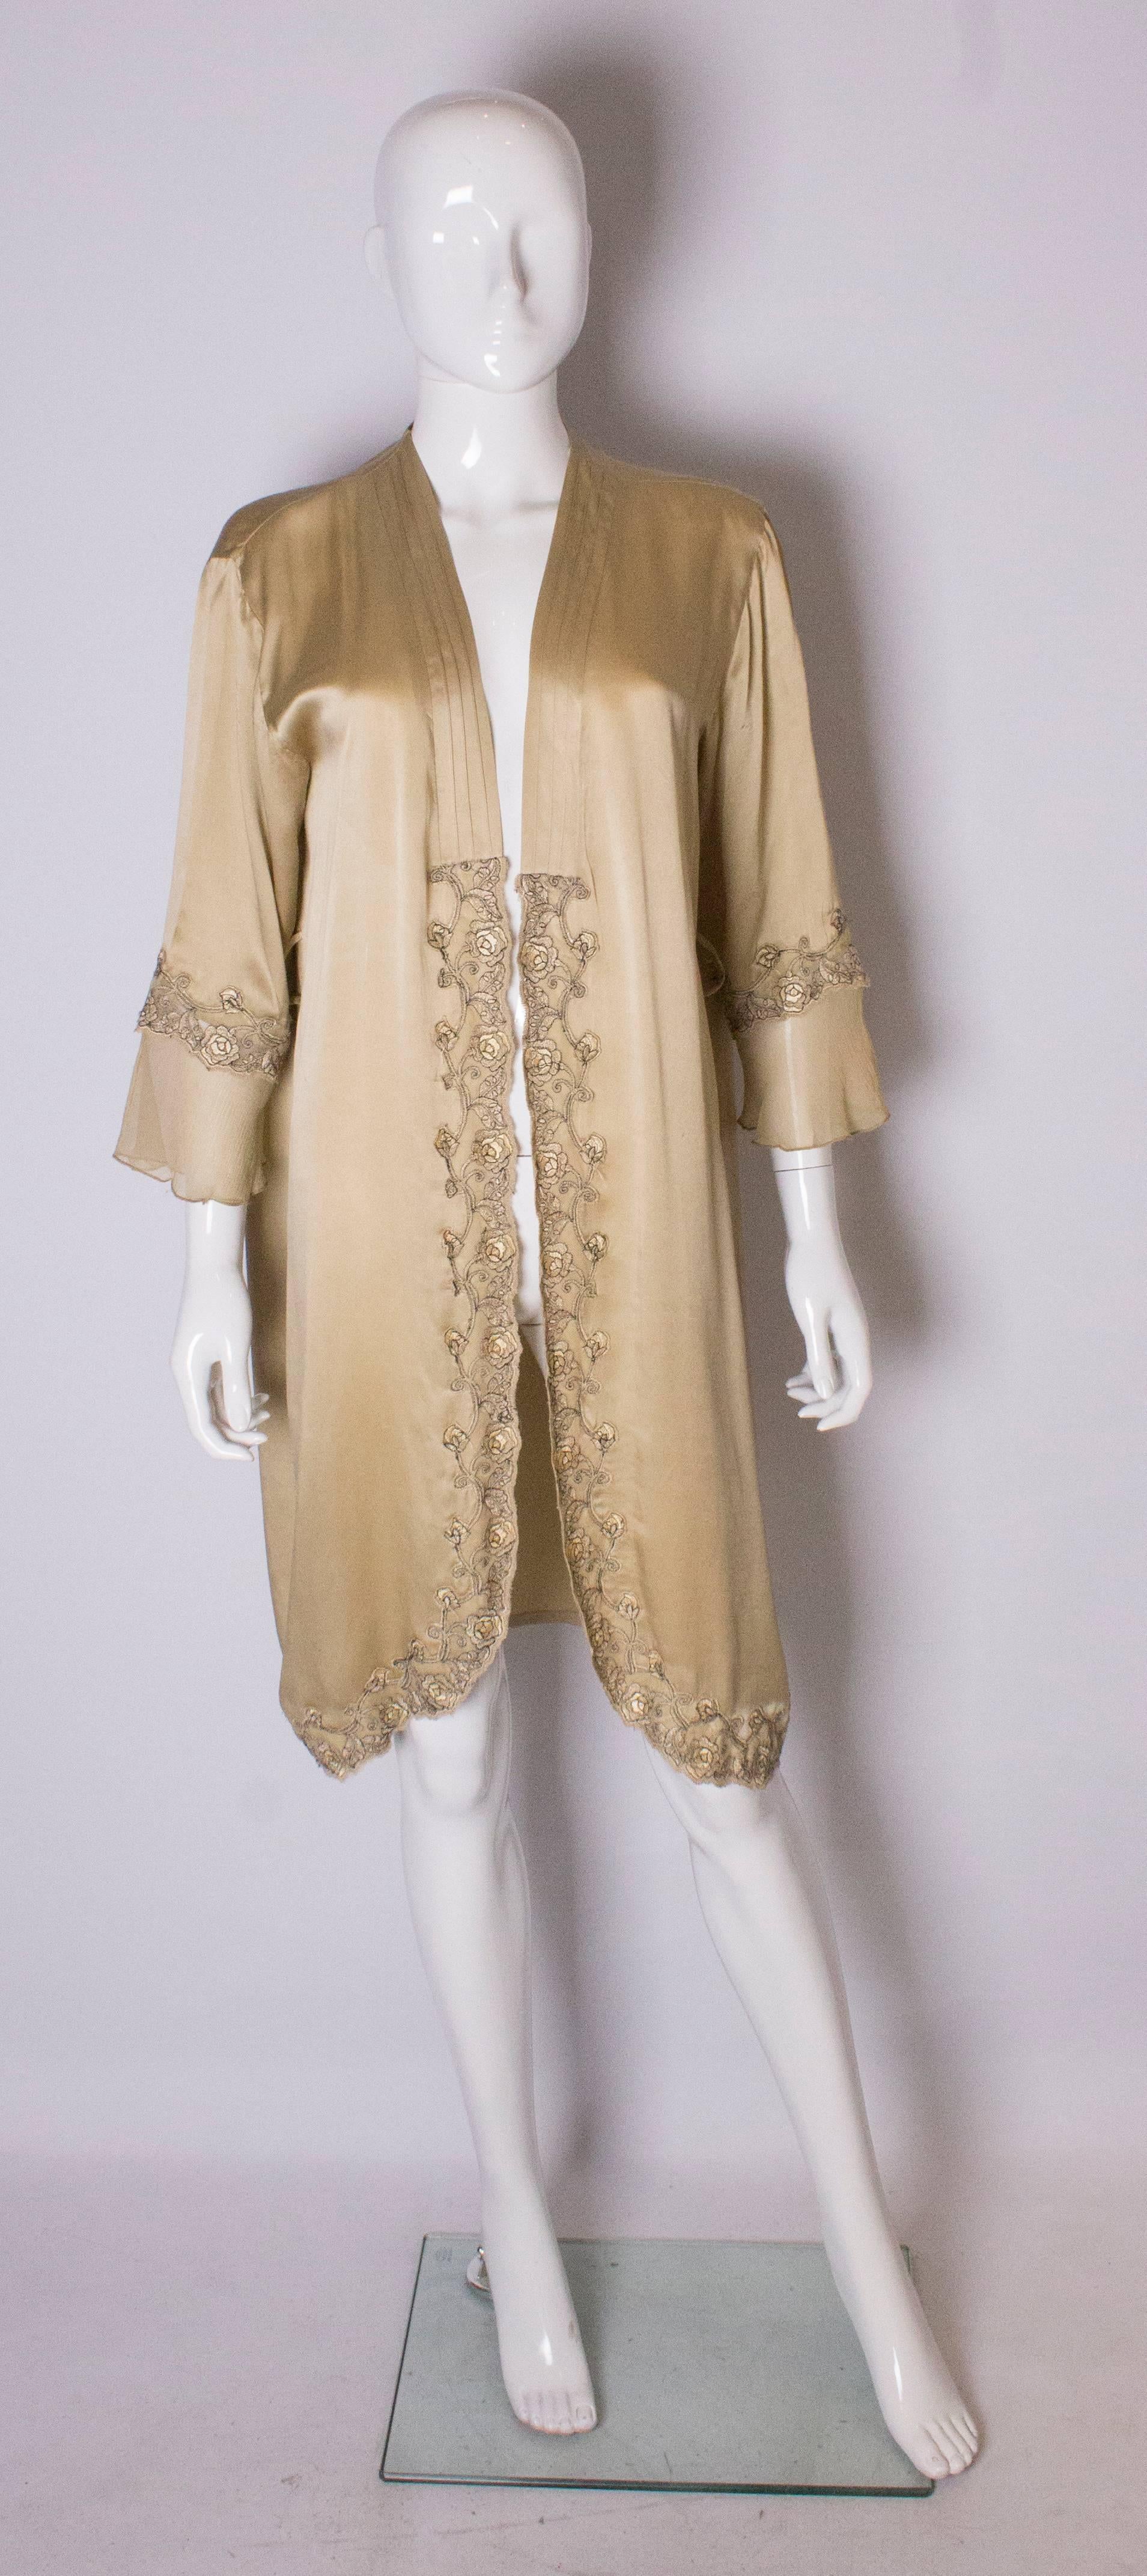 A lovely lingerie robe or loose jacket for Summer. The robe has pleats on the front, and a  lovely black lace detail on the front and cuffs.